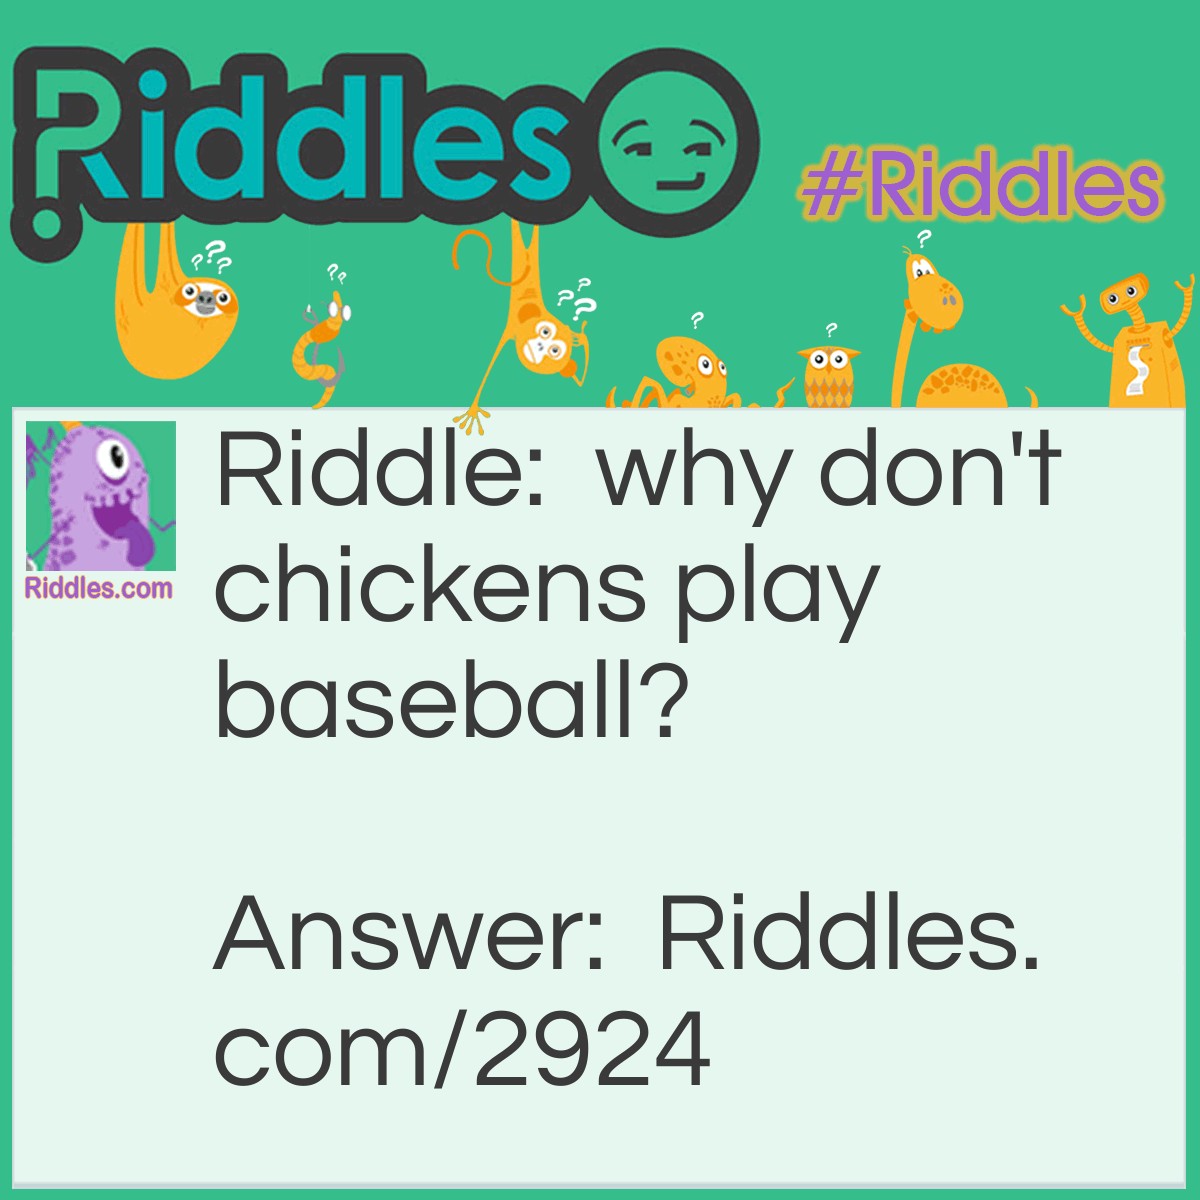 Riddle: Why don't chickens play baseball? Answer: Because they don't have a base or a baseball.